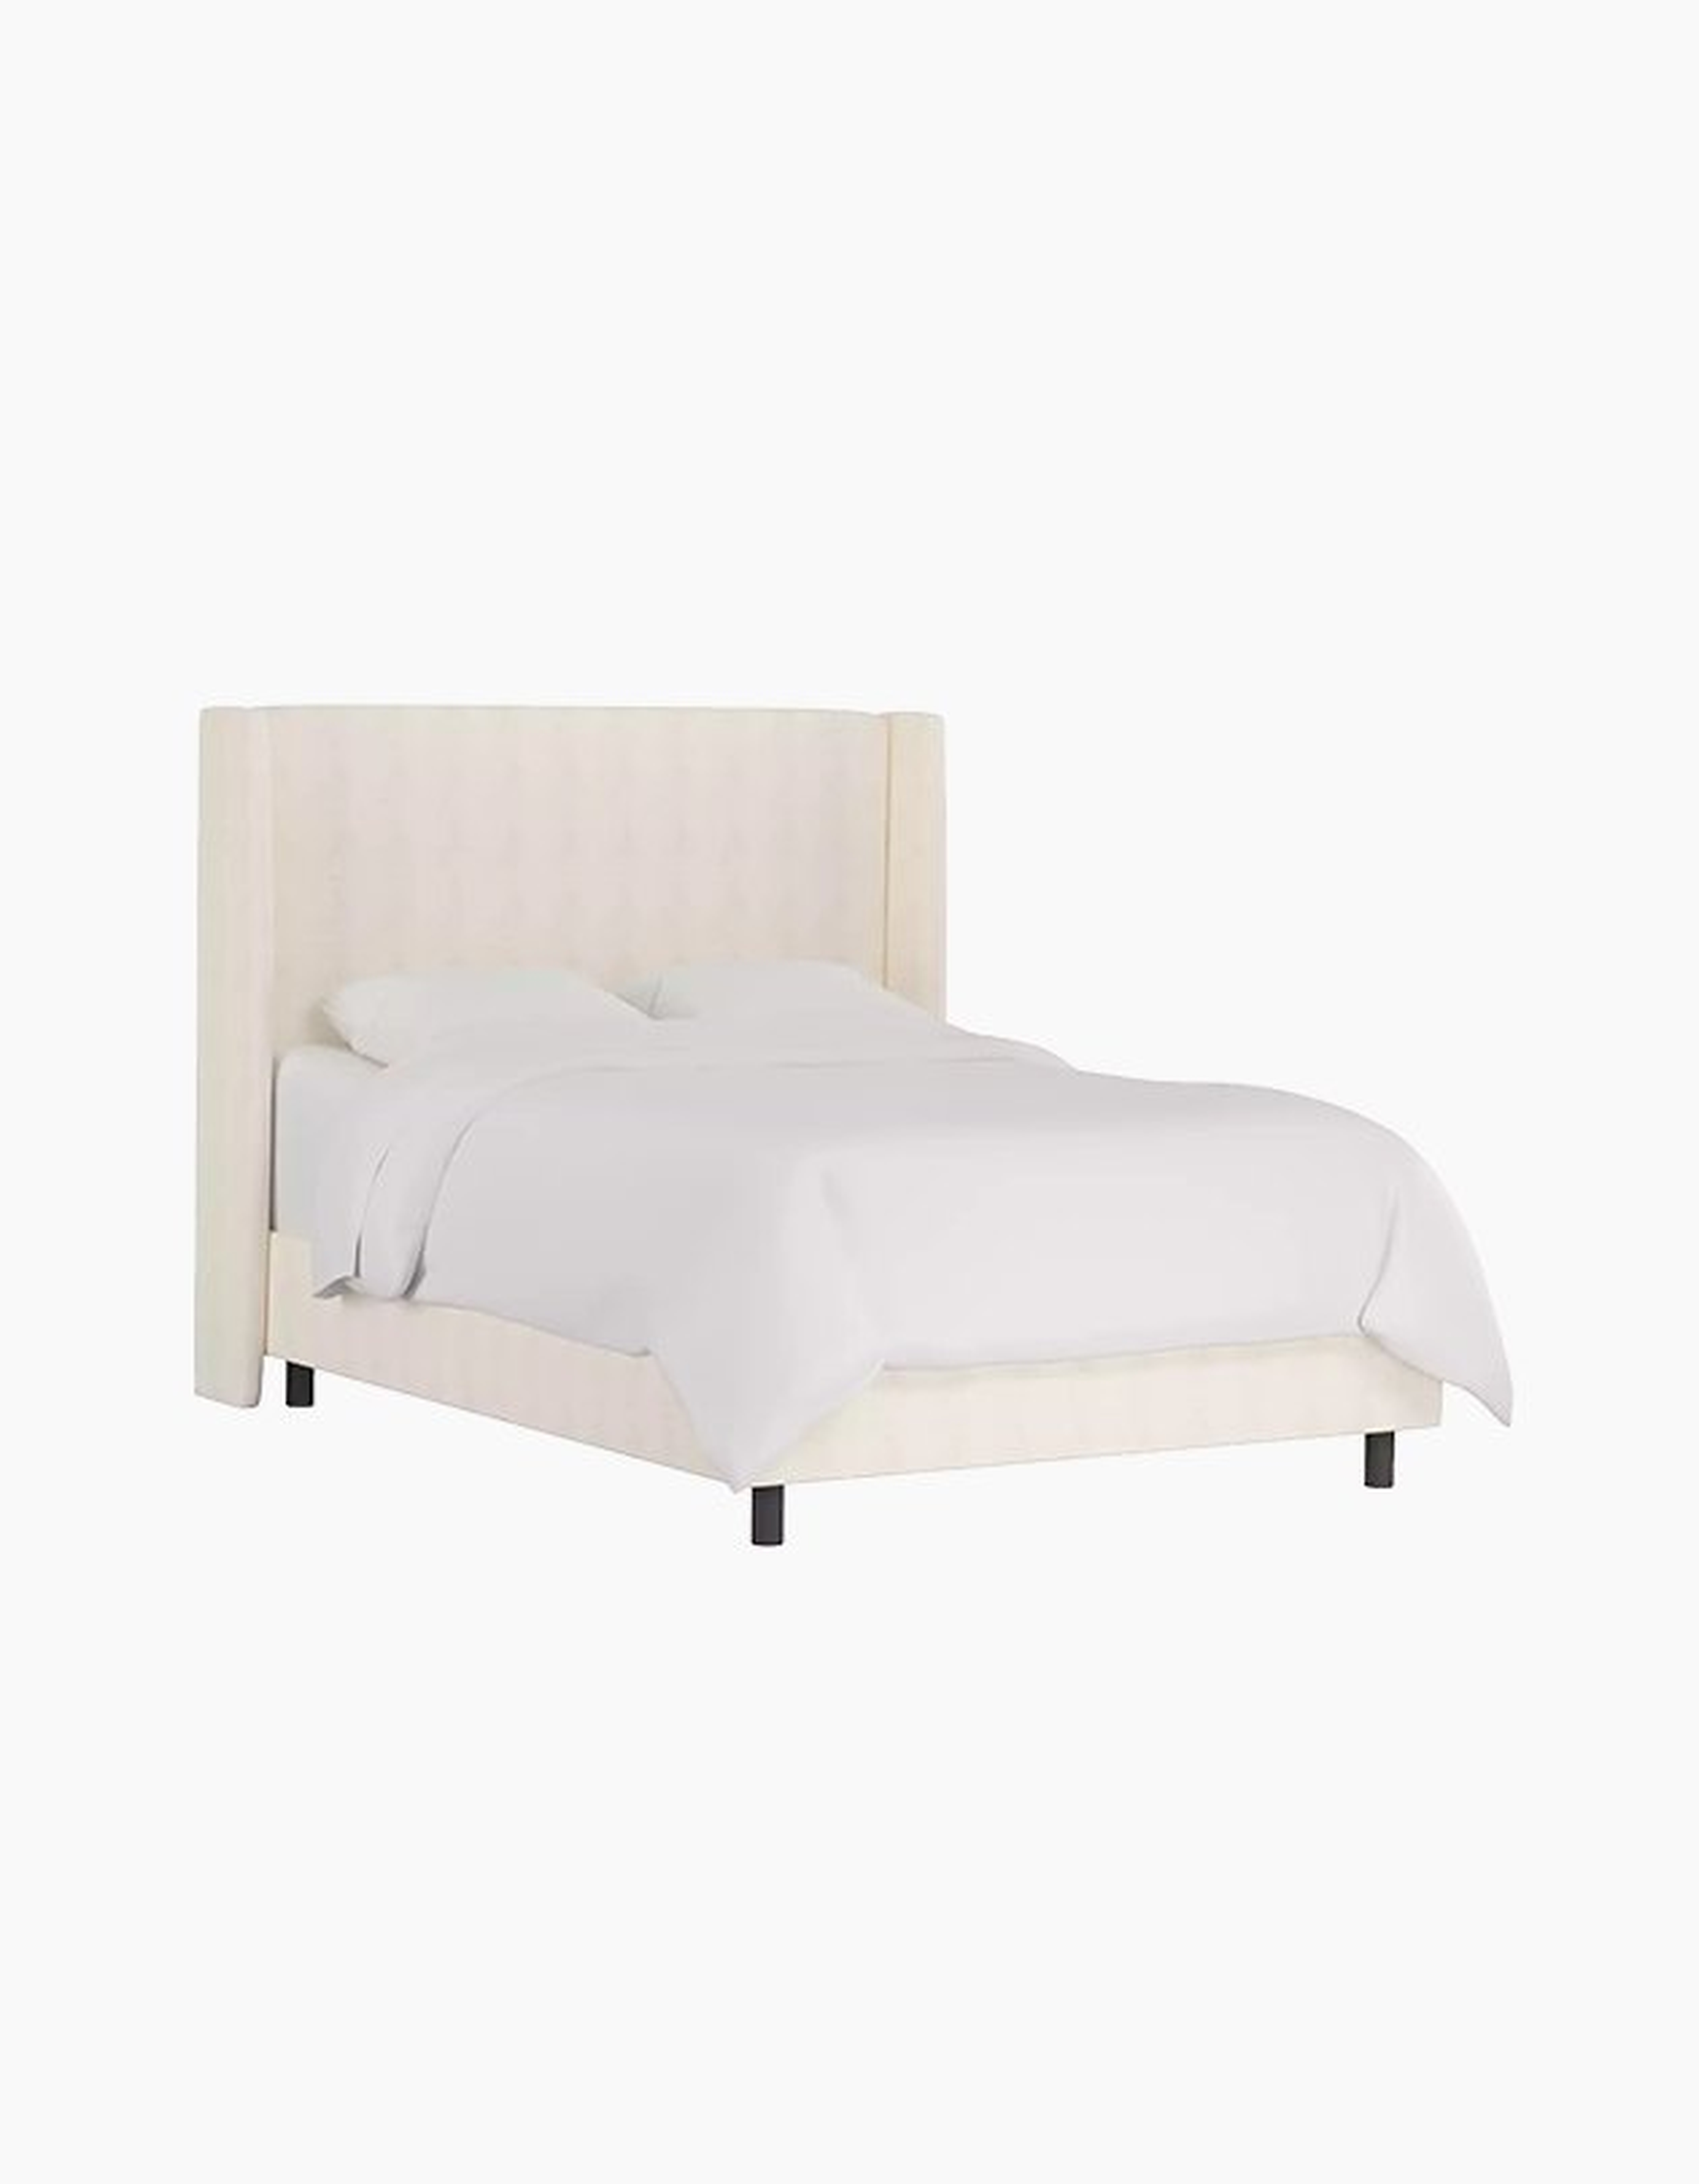 Bannock Wingback Bed, King, White - Cove Goods